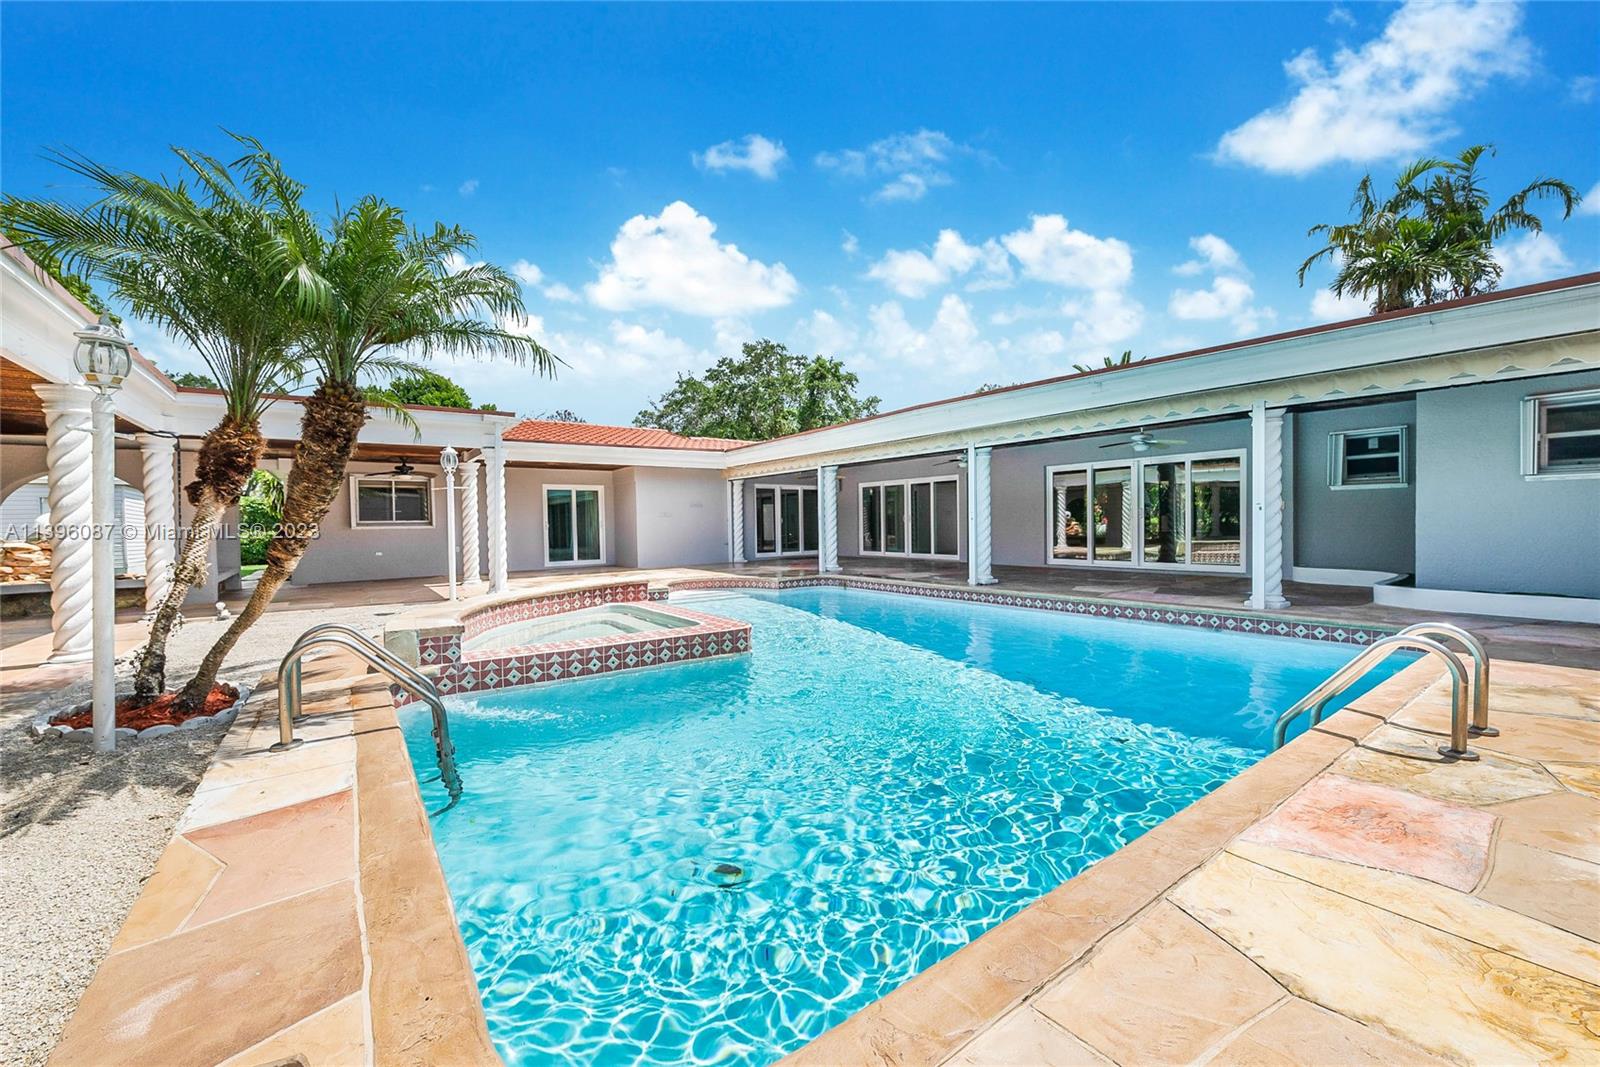 This property encompasses over one acre of land and is adorned with lush landscaping, flourishing fruit trees, a refreshing pool, and a delightful pond featuring a calming waterfall. The master bedroom suite provides a tranquil escape, boasting its private sitting area overlooking the pool and an impressively spacious walk-in closet. The tastefully renovated kitchen, completed in 2017, highlights contemporary stainless steel appliances, elegant granite countertops, and enough seating for over 10 guests, making it ideal for hosting memorable gatherings. The residence boasts an inviting open floor plan. With an abundance of space, this property offers ample room for living, working, and recreation, ensuring your every need is met.